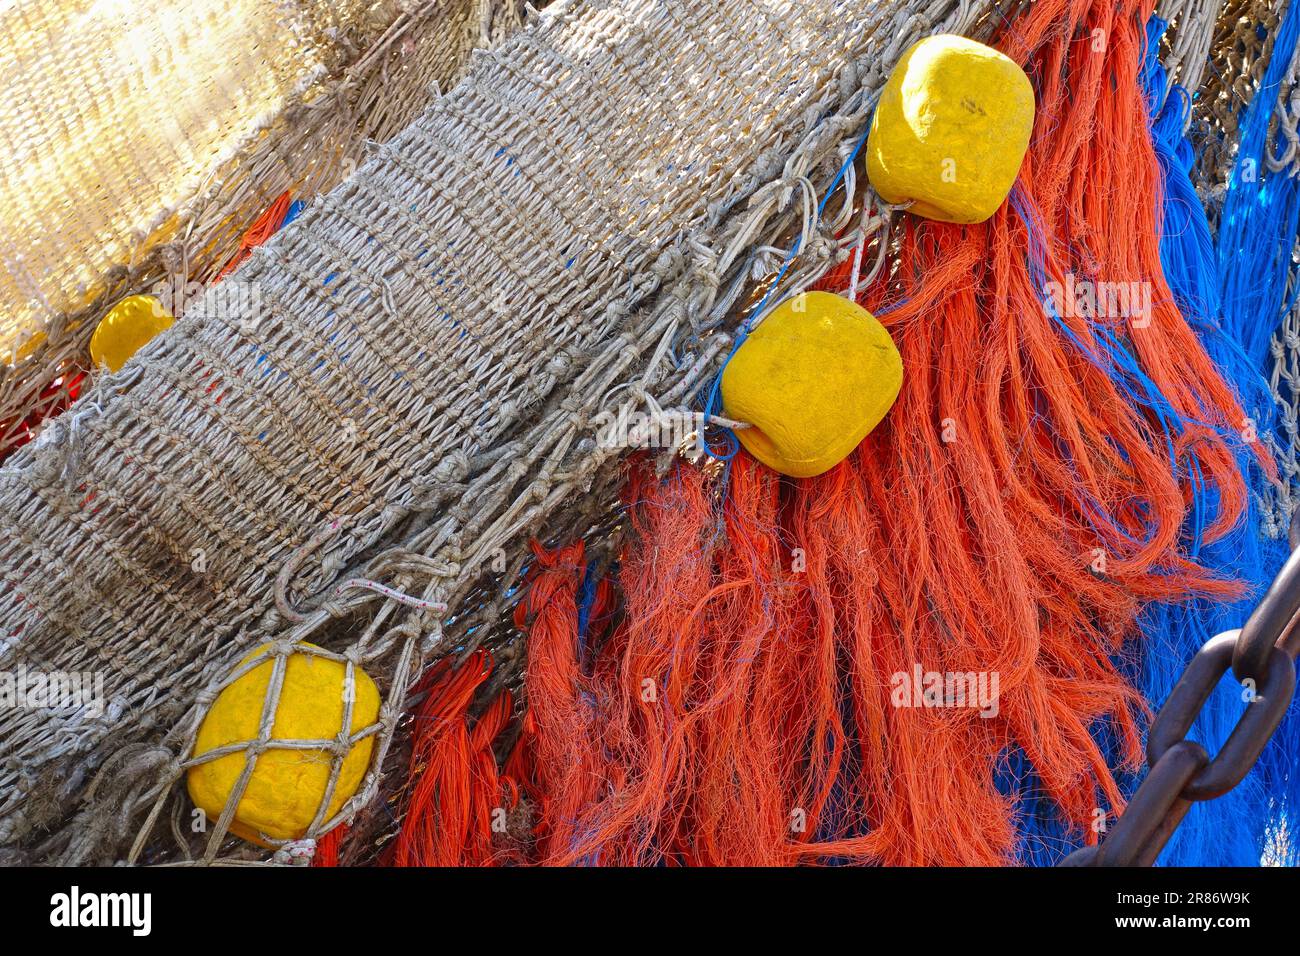 Close-up of a trawler fishing net with tassels and floats Stock Photo